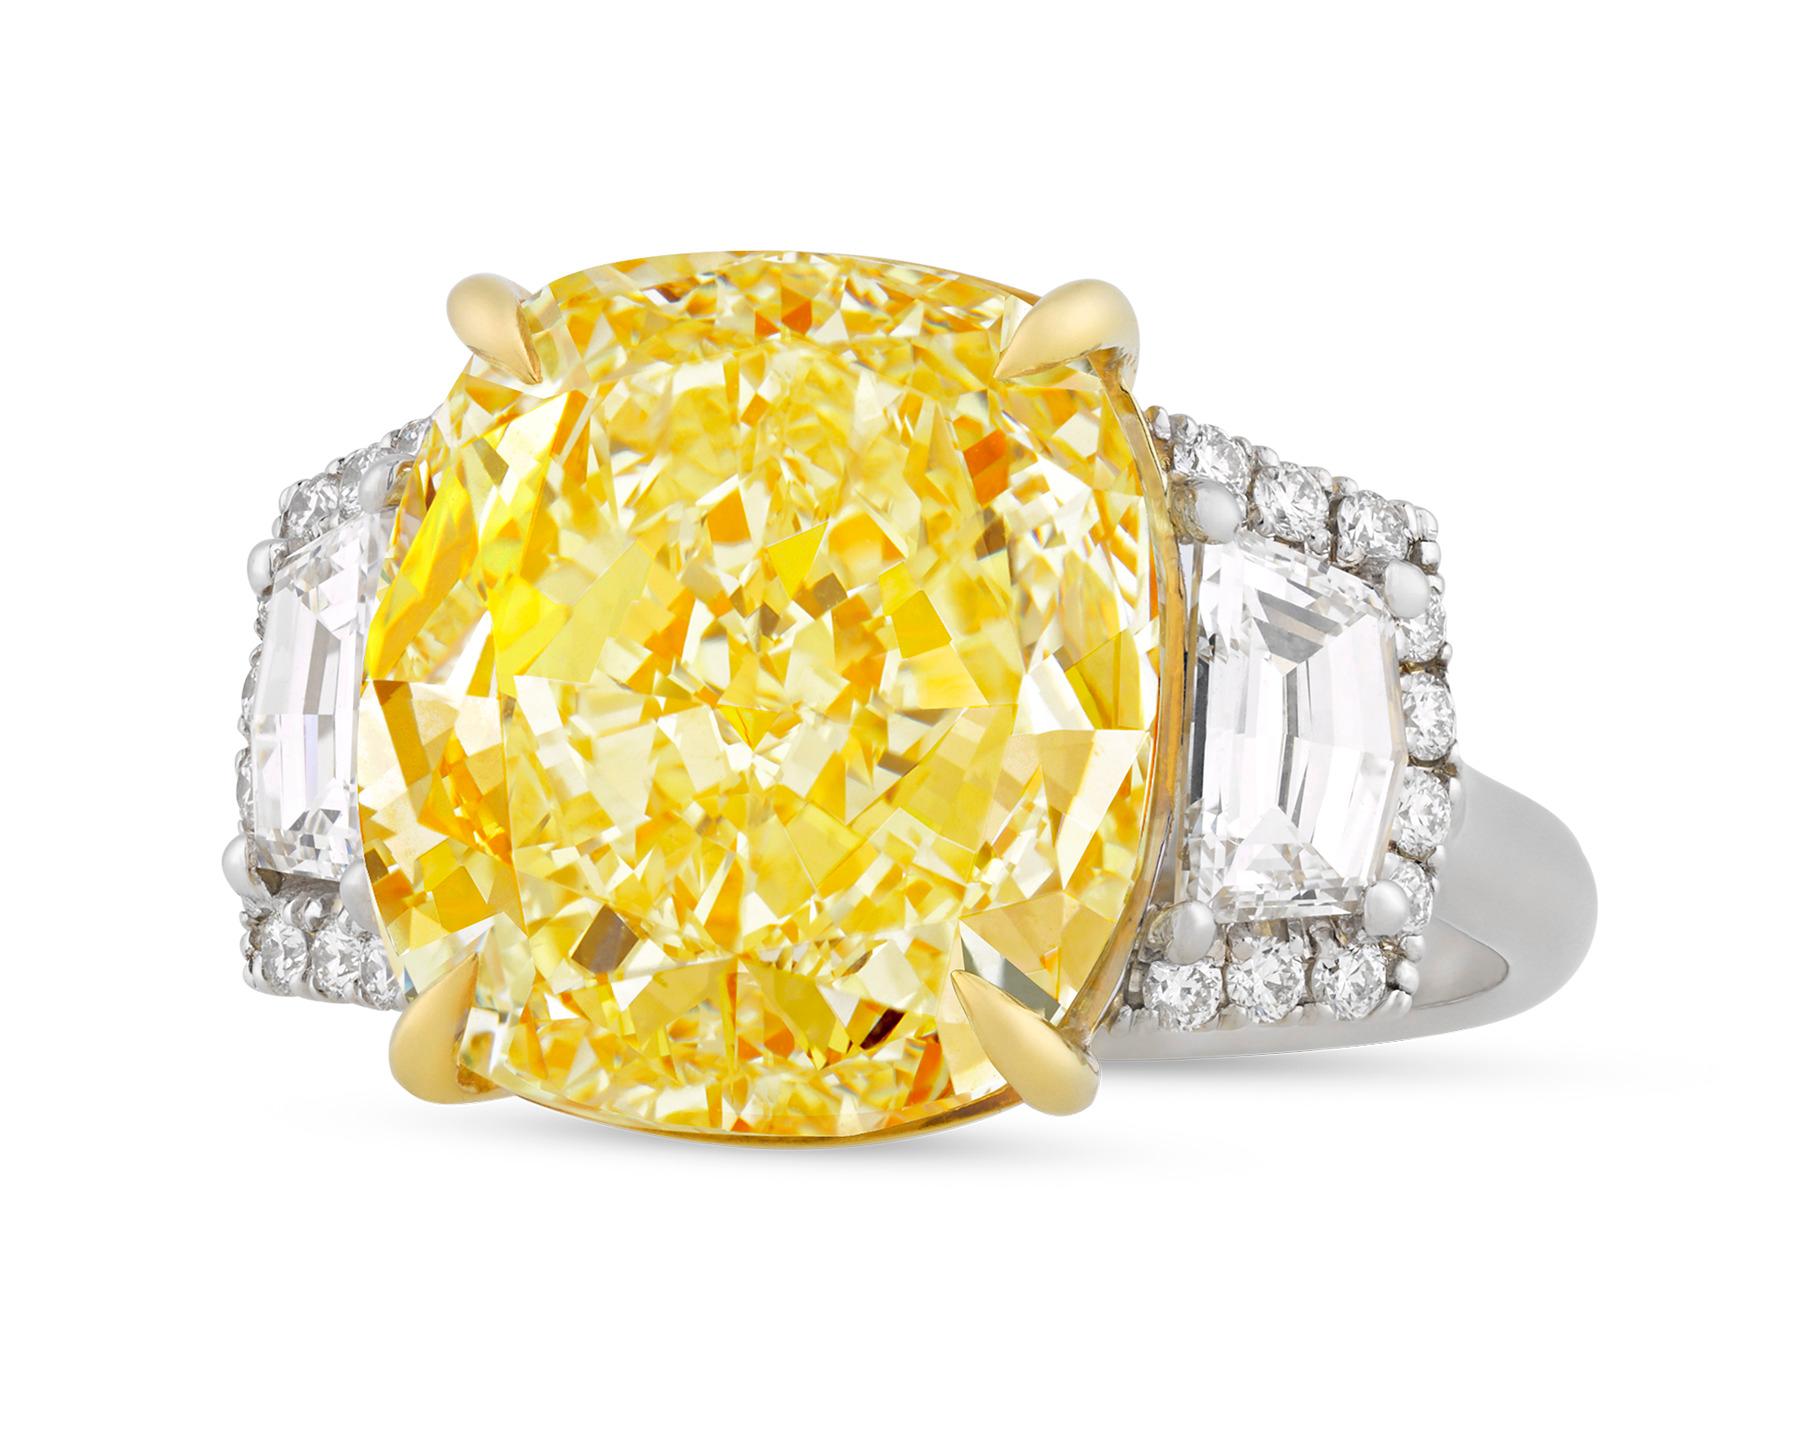 A truly exceptional 11.00-carat fancy yellow diamond is the star of this eye-catching ring. The cushion-cut gemstone is certified by the Gemological Institute of America as 